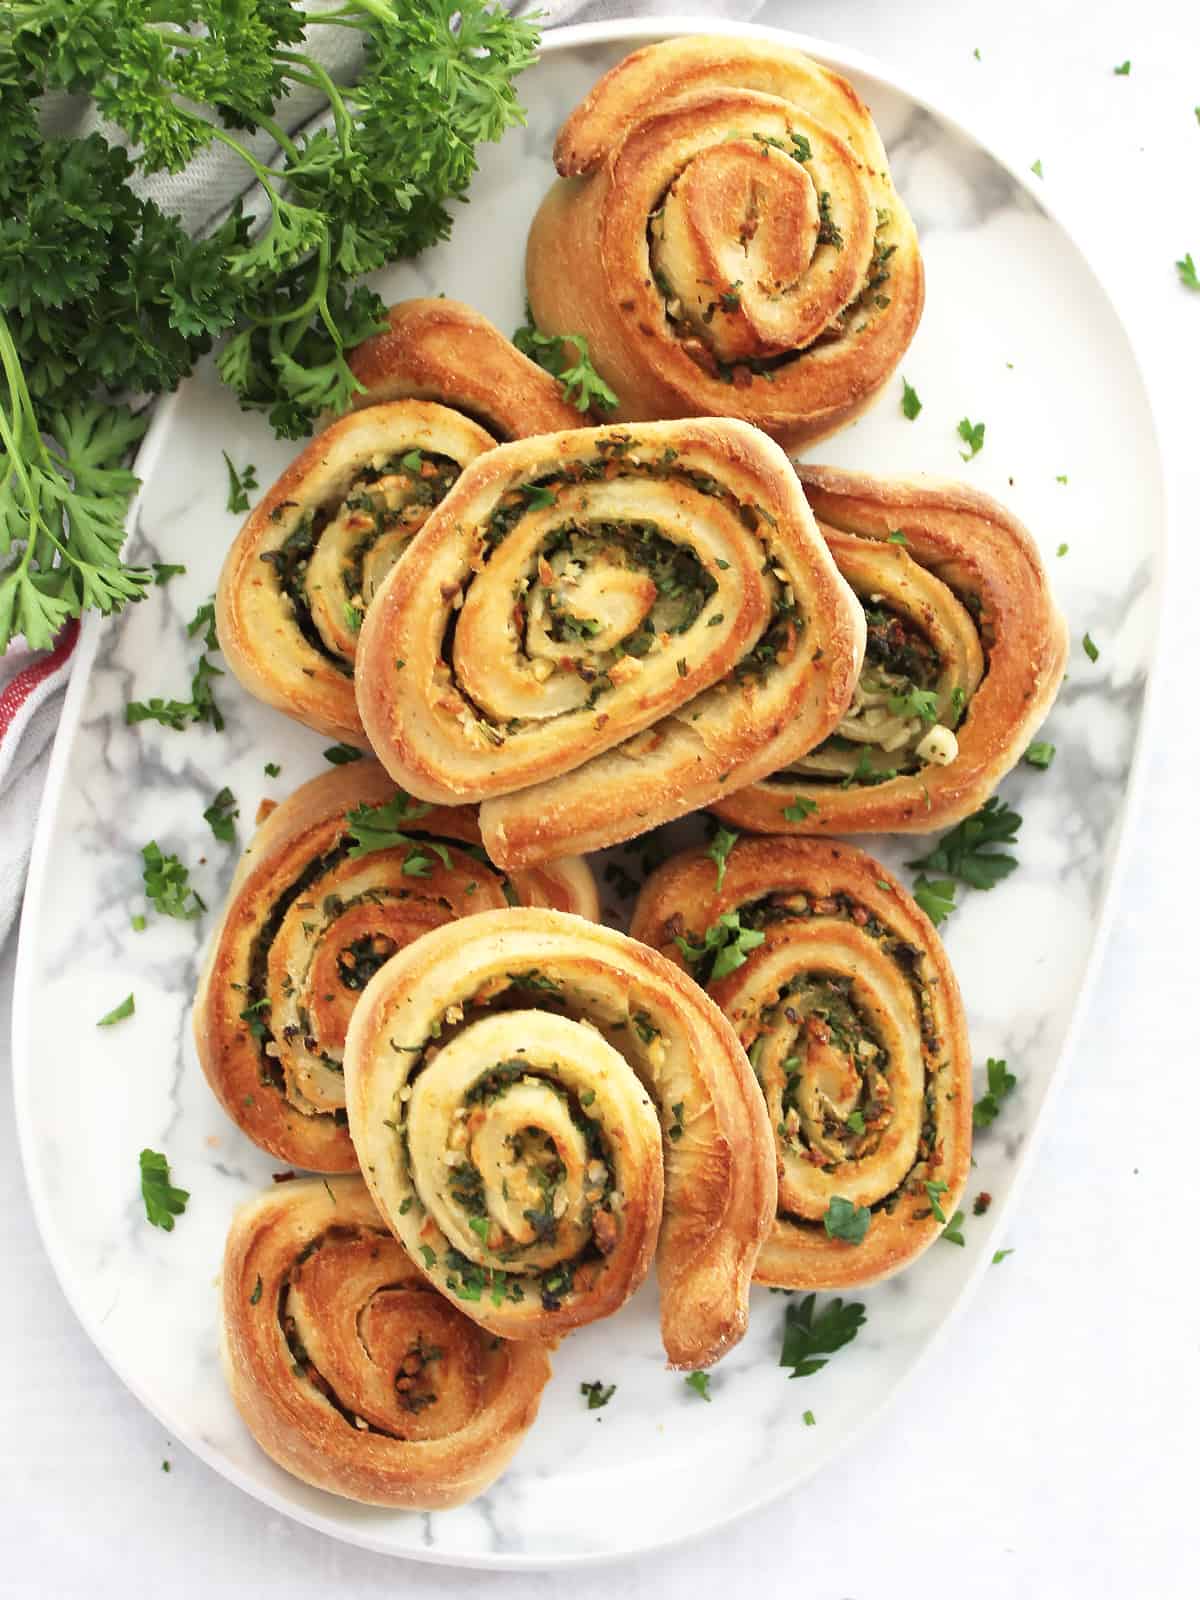 Air fryer garlic pizza rolls stacked on a plate with fresh parsley garnish.